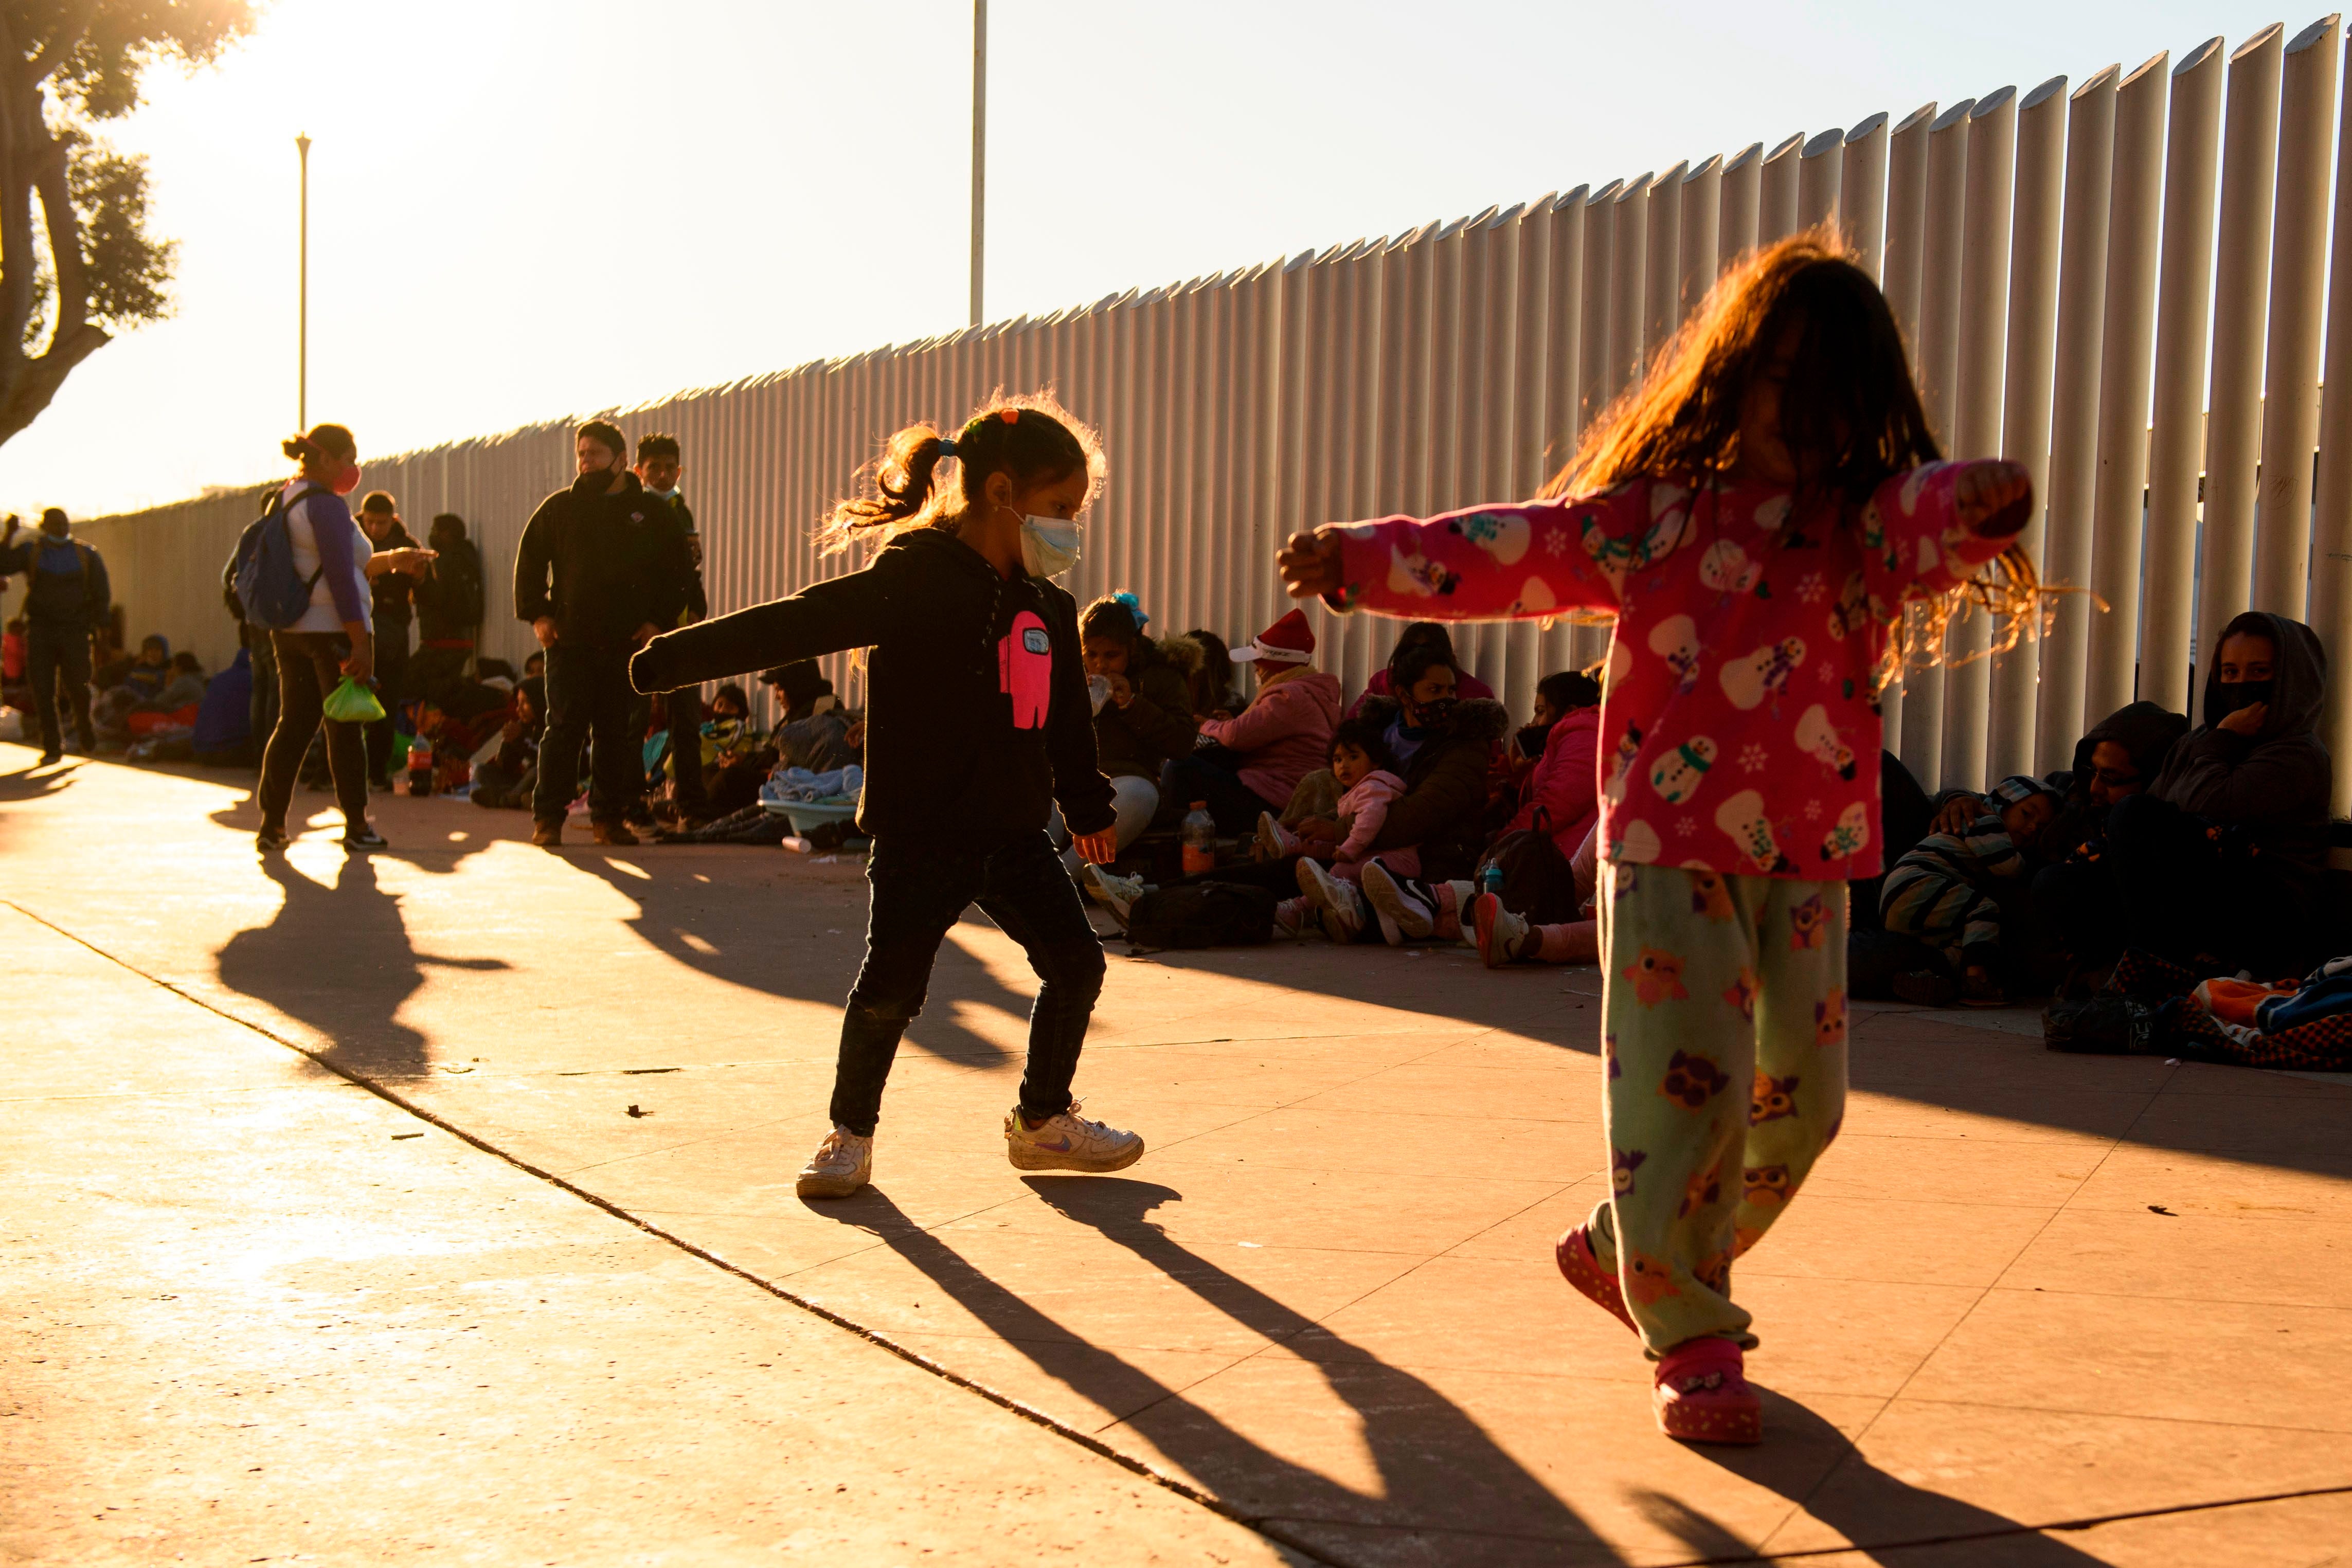 Children play as families of asylum seekers wait outside the El Chaparral border crossing port as they wait to cross into the United States in Tijuana, Baja California state, Mexico